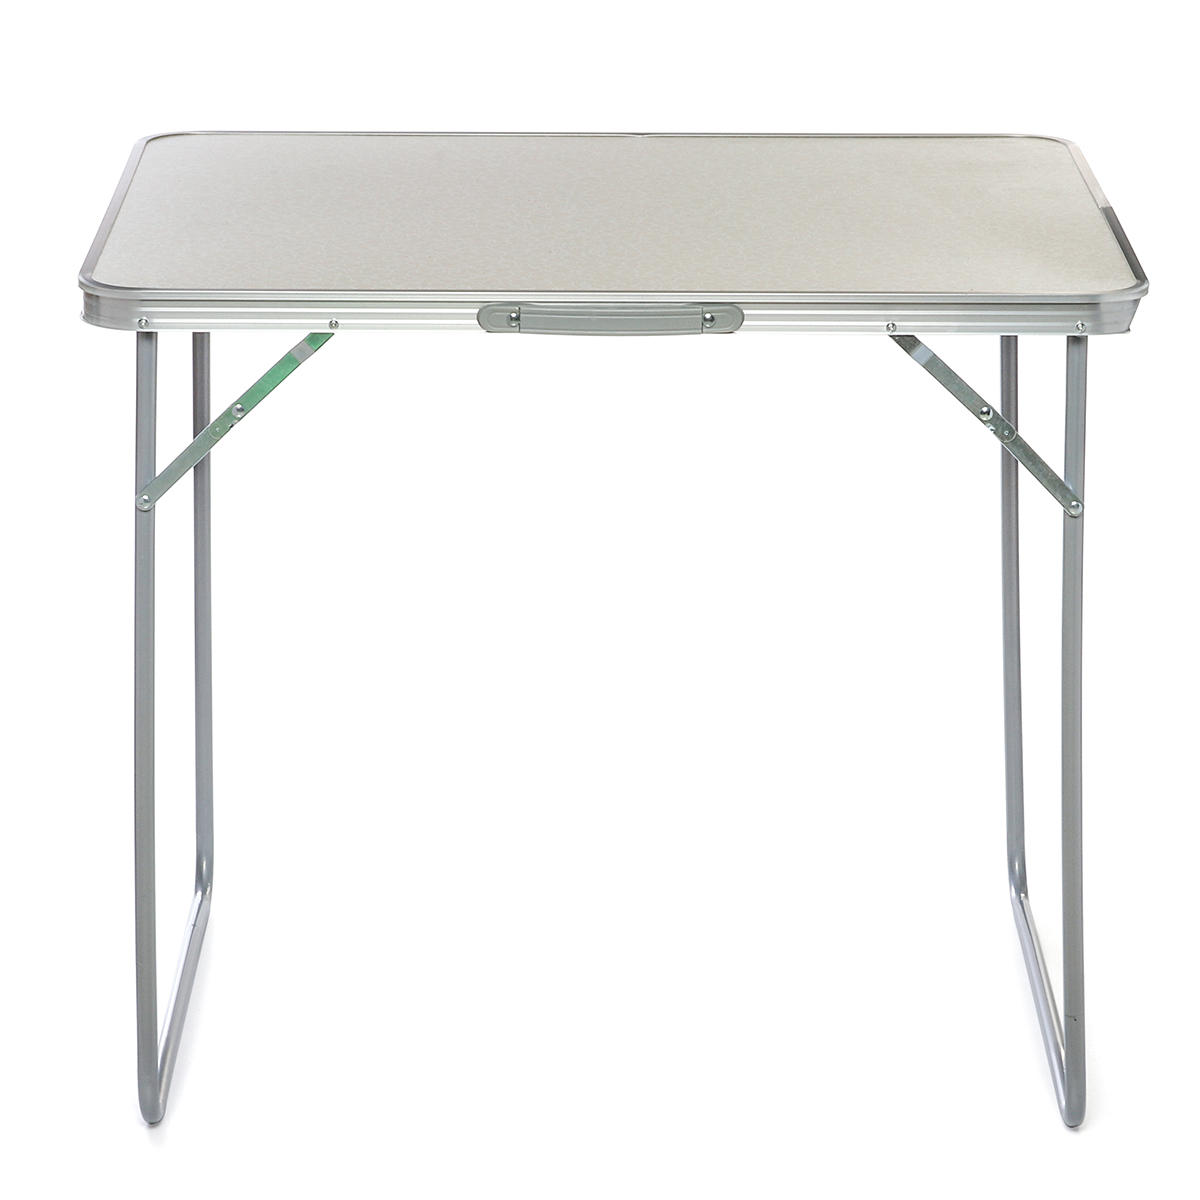 Portable Folding Table Laptop Desk Study Table Aluminum Camping Table with Carrying Handle andFoldable Legs Table for